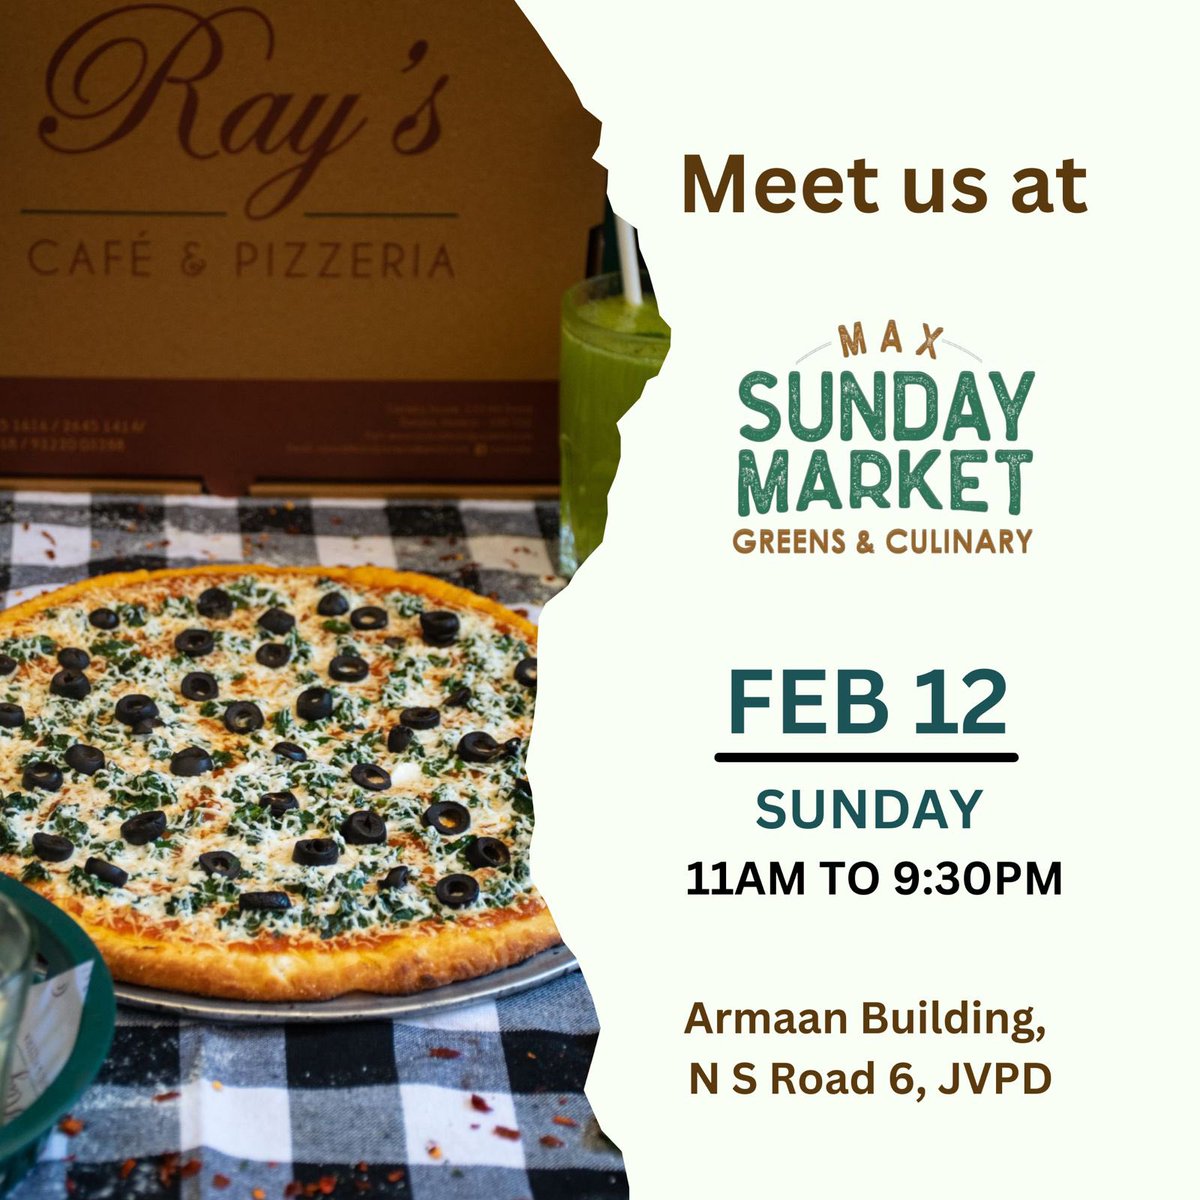 Juhu! It’s time to indulge in your Slice Of Heaven 🍕😋

Come meet us at Max Sunday Market in Juhu on Sunday 12th of February!

#RaysPizzeria #RaysPizza #sundaymarket #maxsundaymarket #Pizzaplace #Mumbai #juhu #mumbaifoodie #pizzalicious #thingstodoinmumbai #weekendbrunch